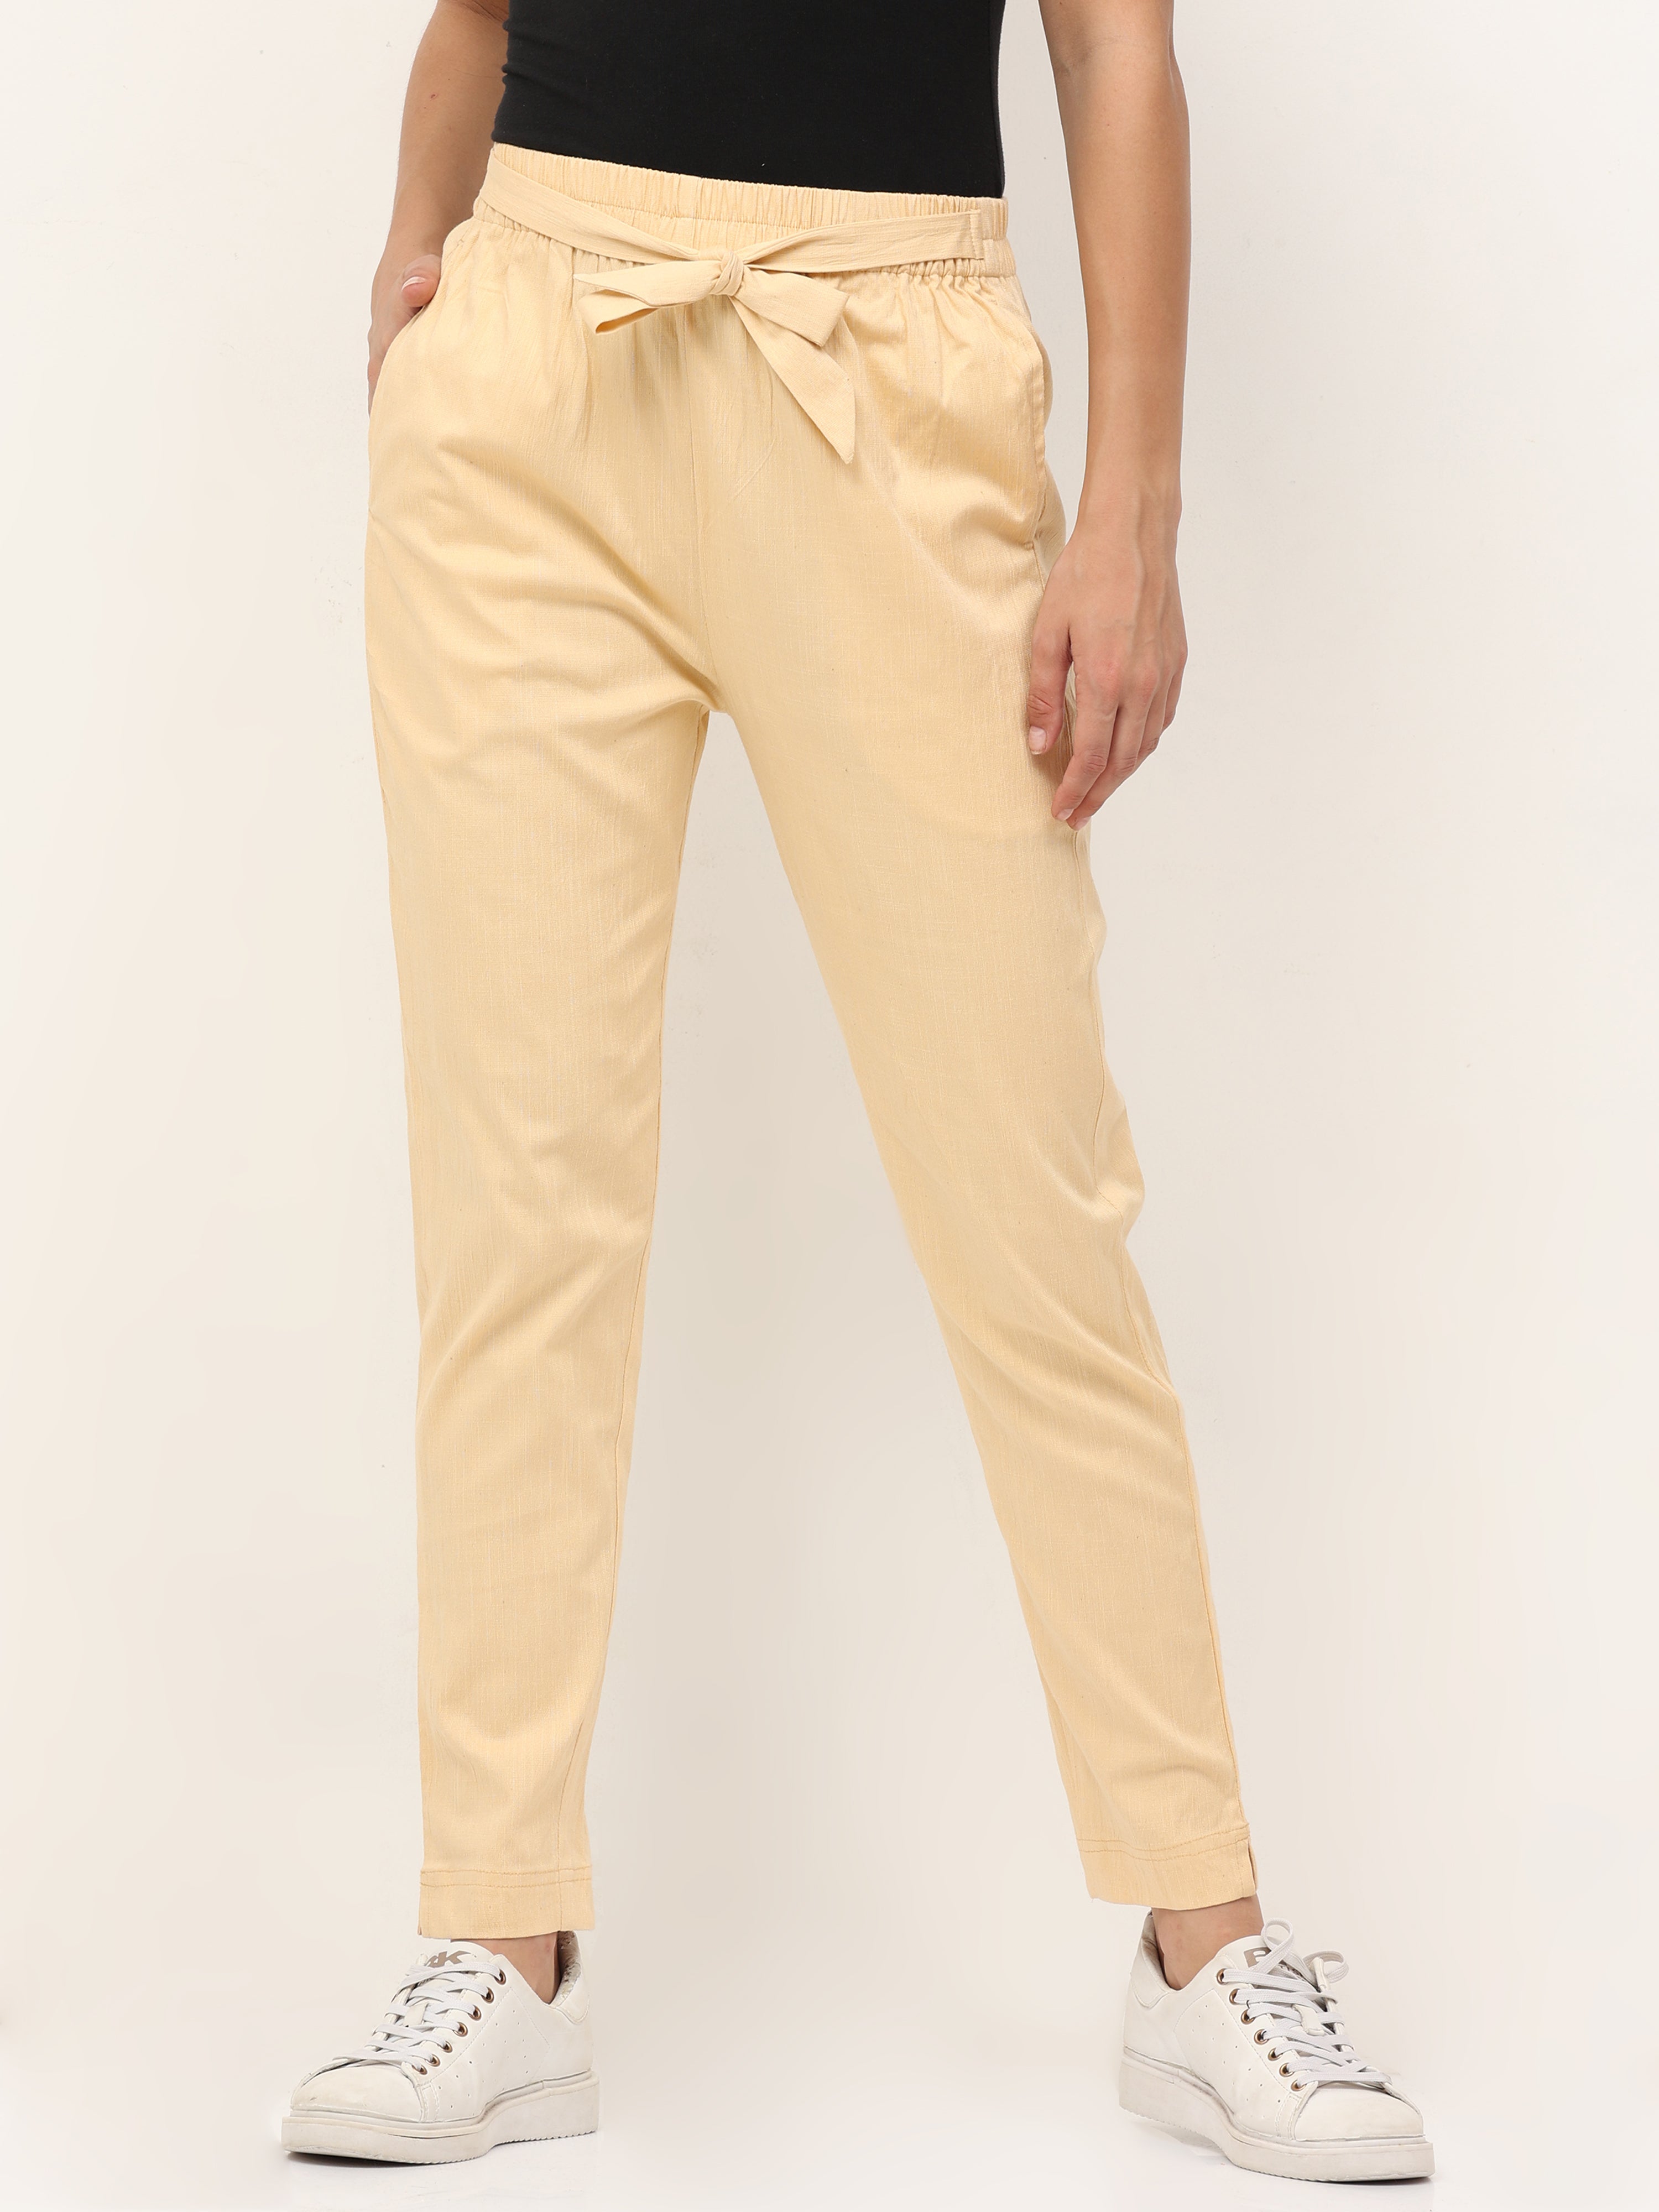 Buy NTX Cotton Flex Ankle Length Trouser Pants/Pencil Pants for Women  (NTX-F17-Light Skin) at Amazon.in